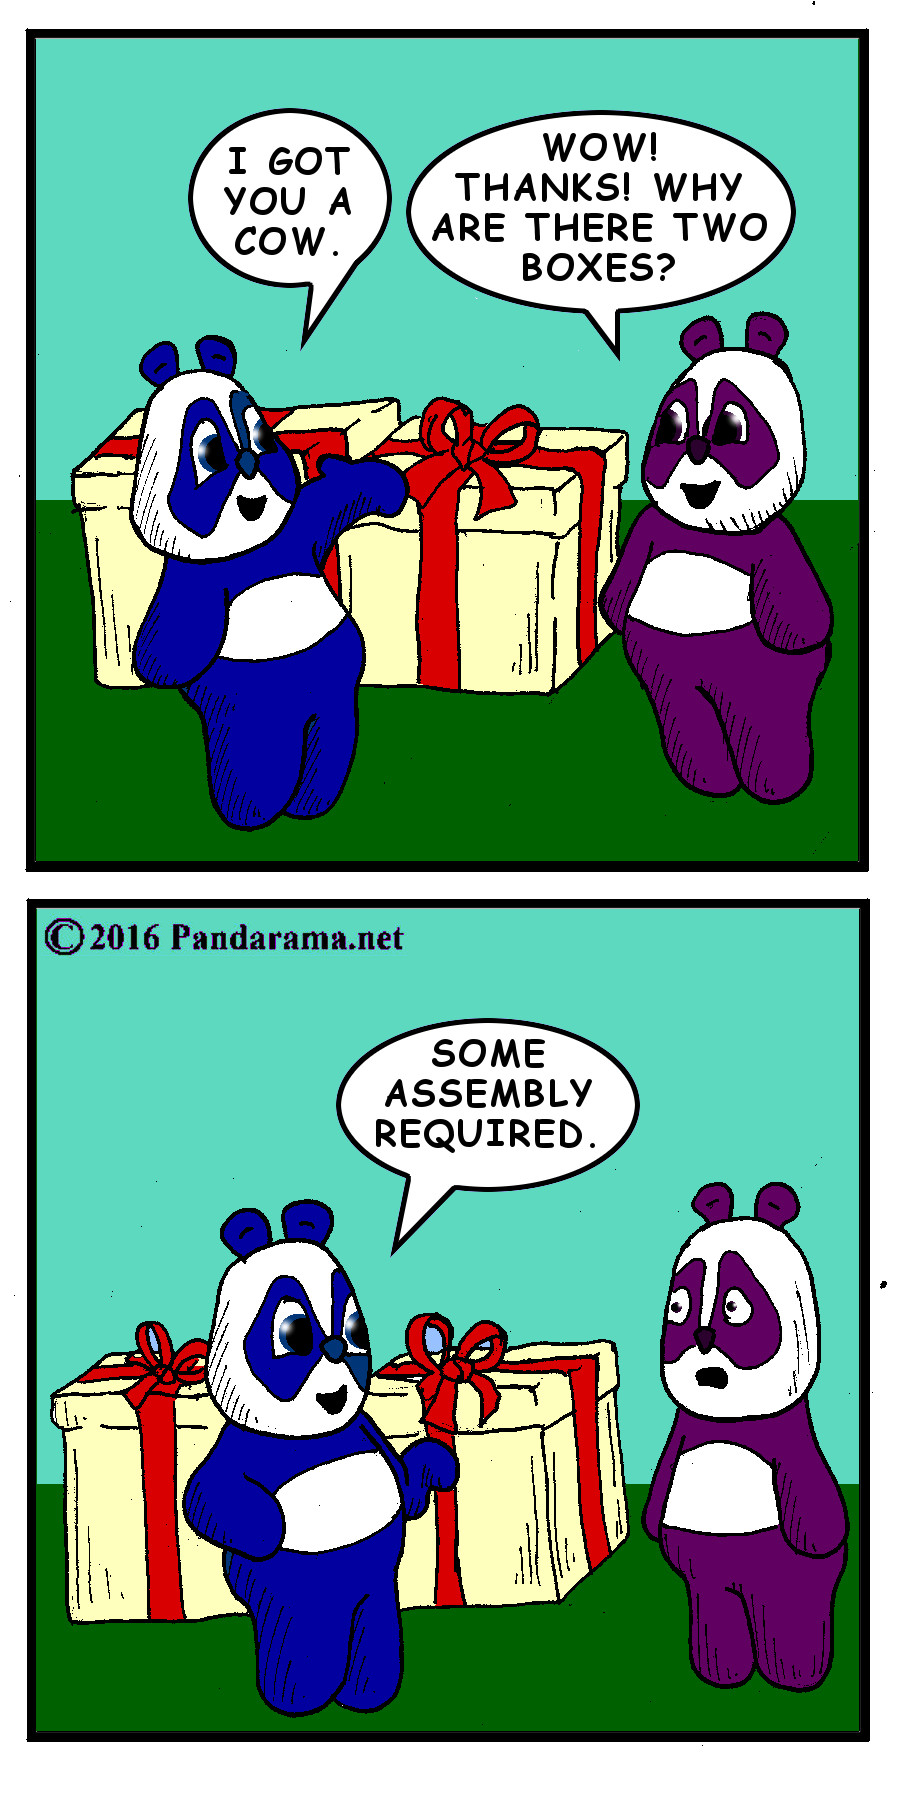 panda presents other panda with two gift boxes. panda: I got you a cow. Other panda thanks, why are their two boxes? First panda: some assembly required.